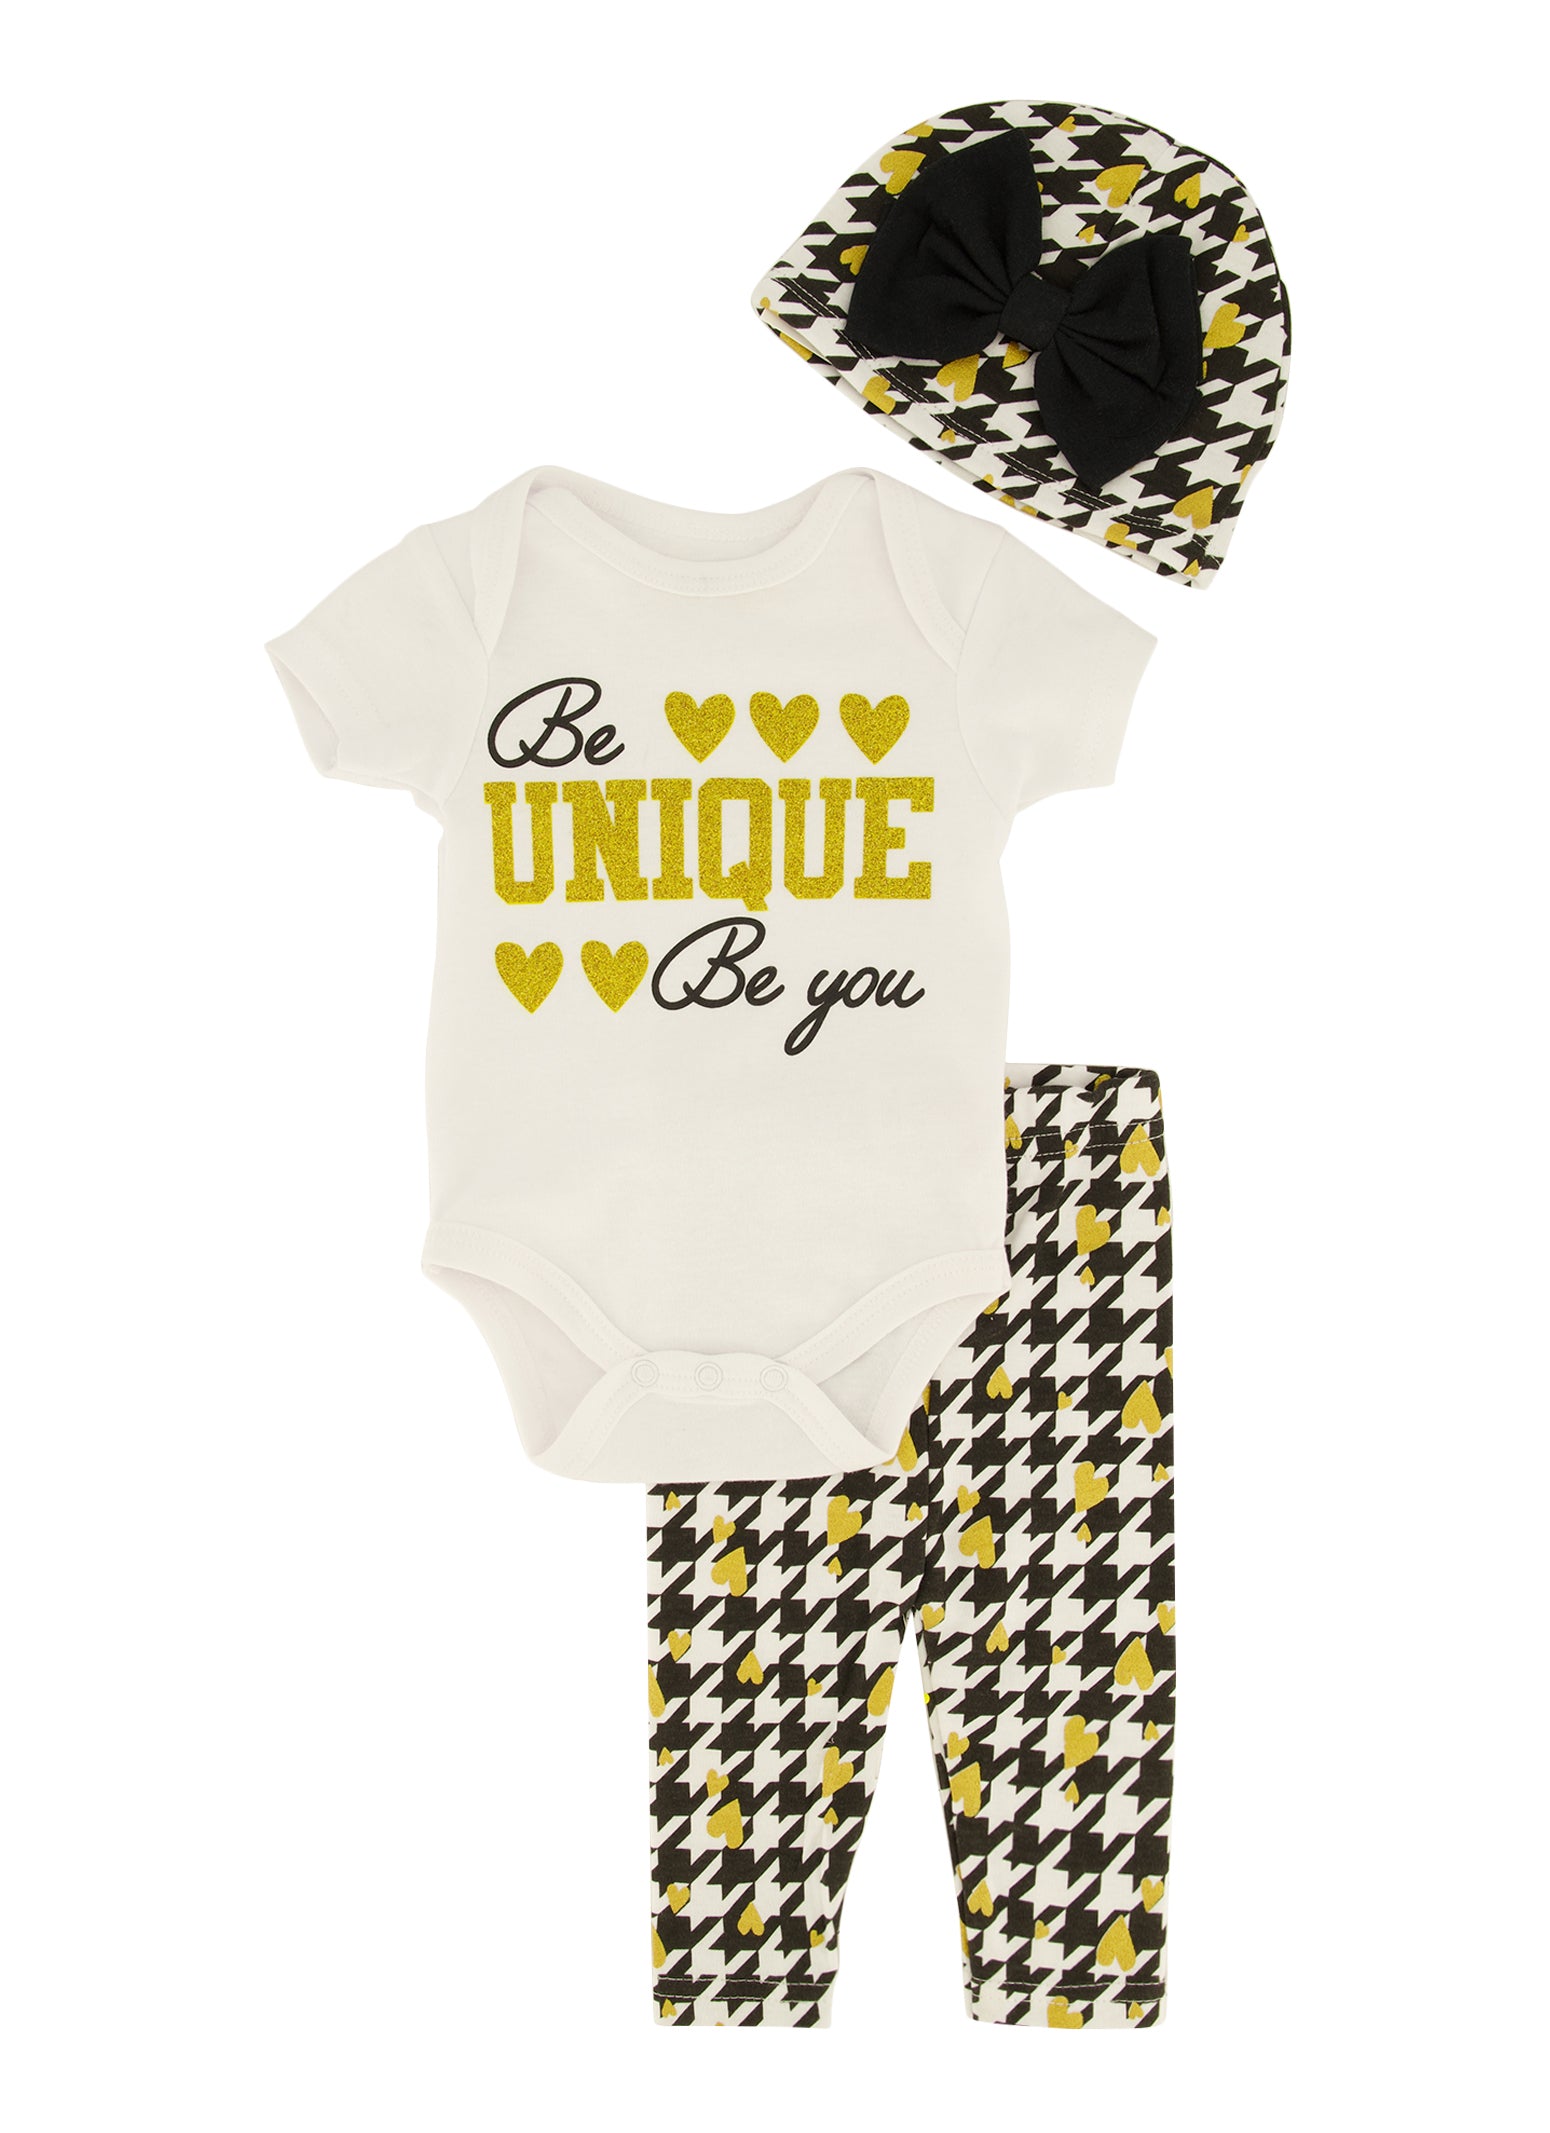 Rainbow Shops Baby Girls 0-9M Be Unique Be You Bodysuit and Houndstooth Leggings  Set, White, Size 6-9M